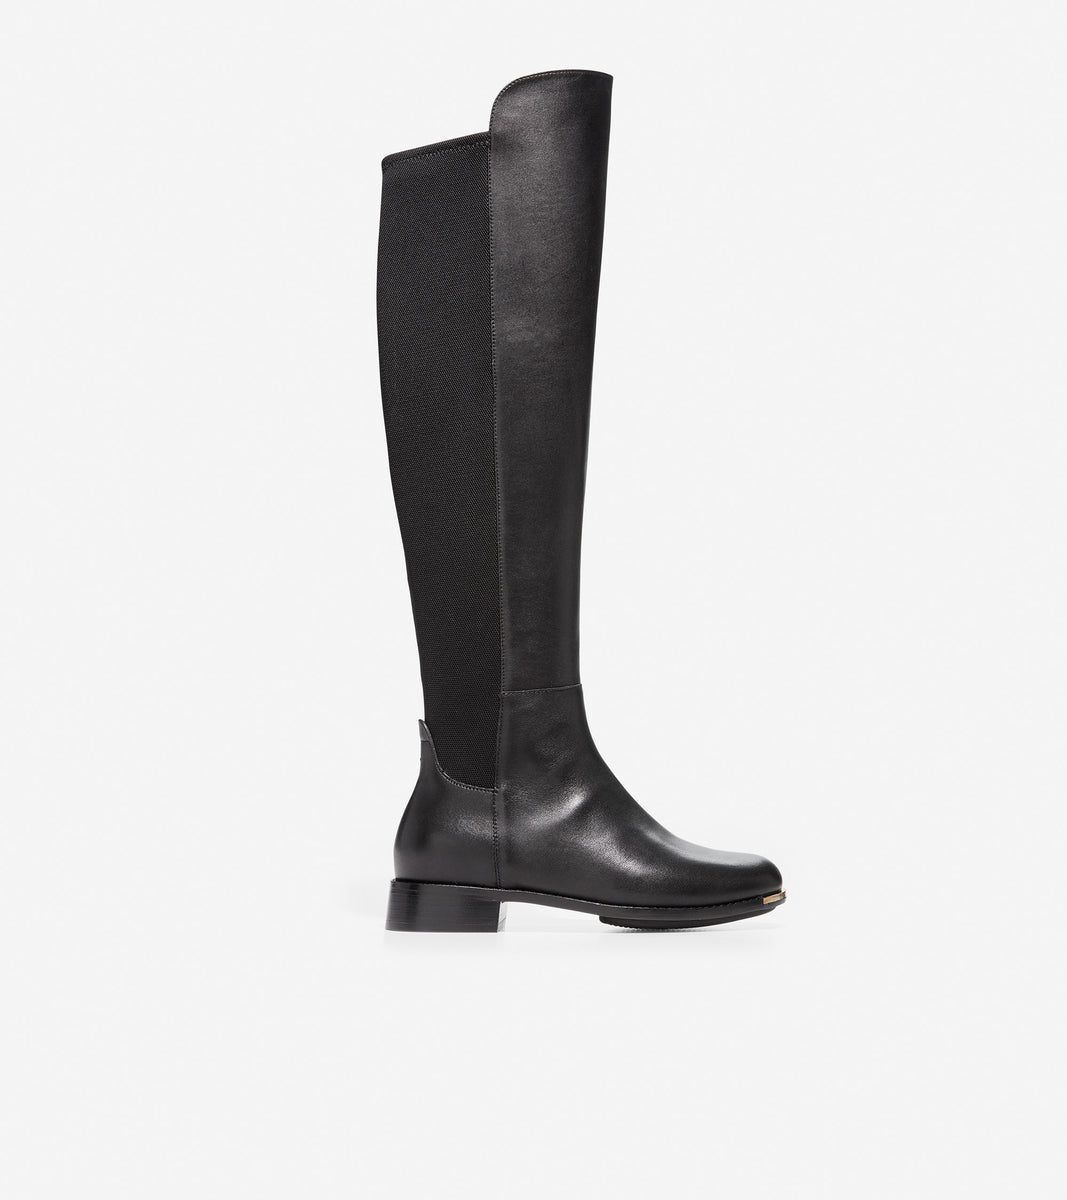 ColeHaan-Grand Ambition Huntington Boot-w18991-Black Leather